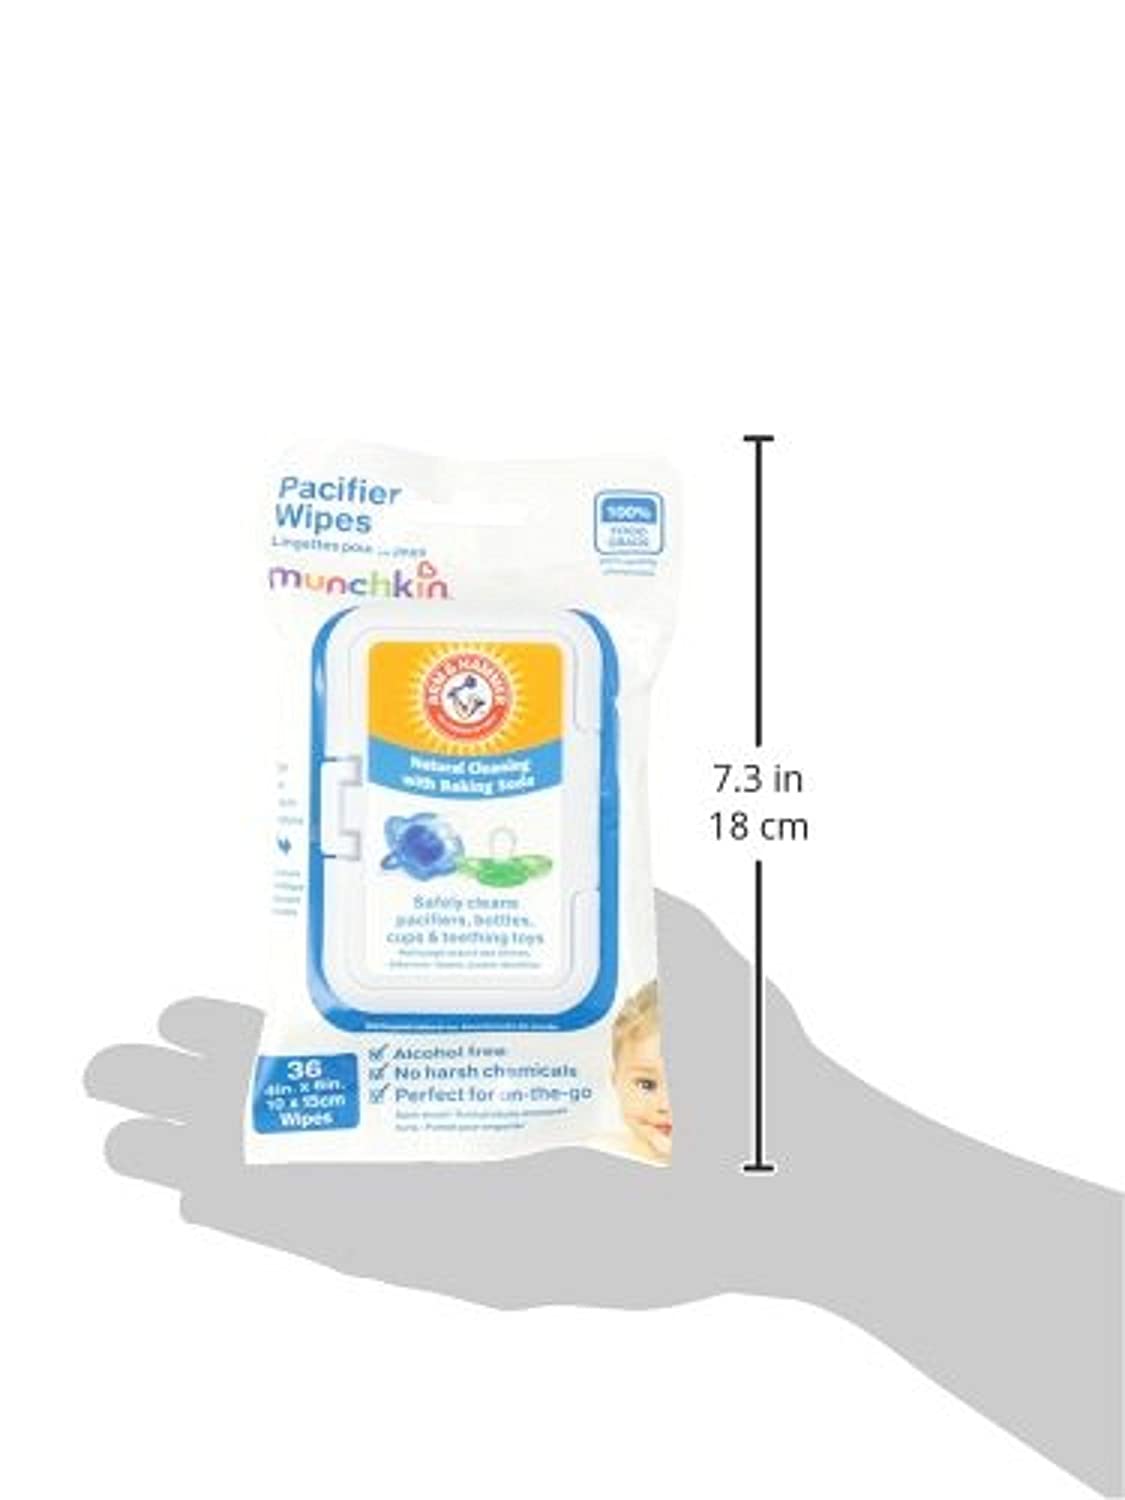 Munchkin Arm and Hammer Pacifier Wipes